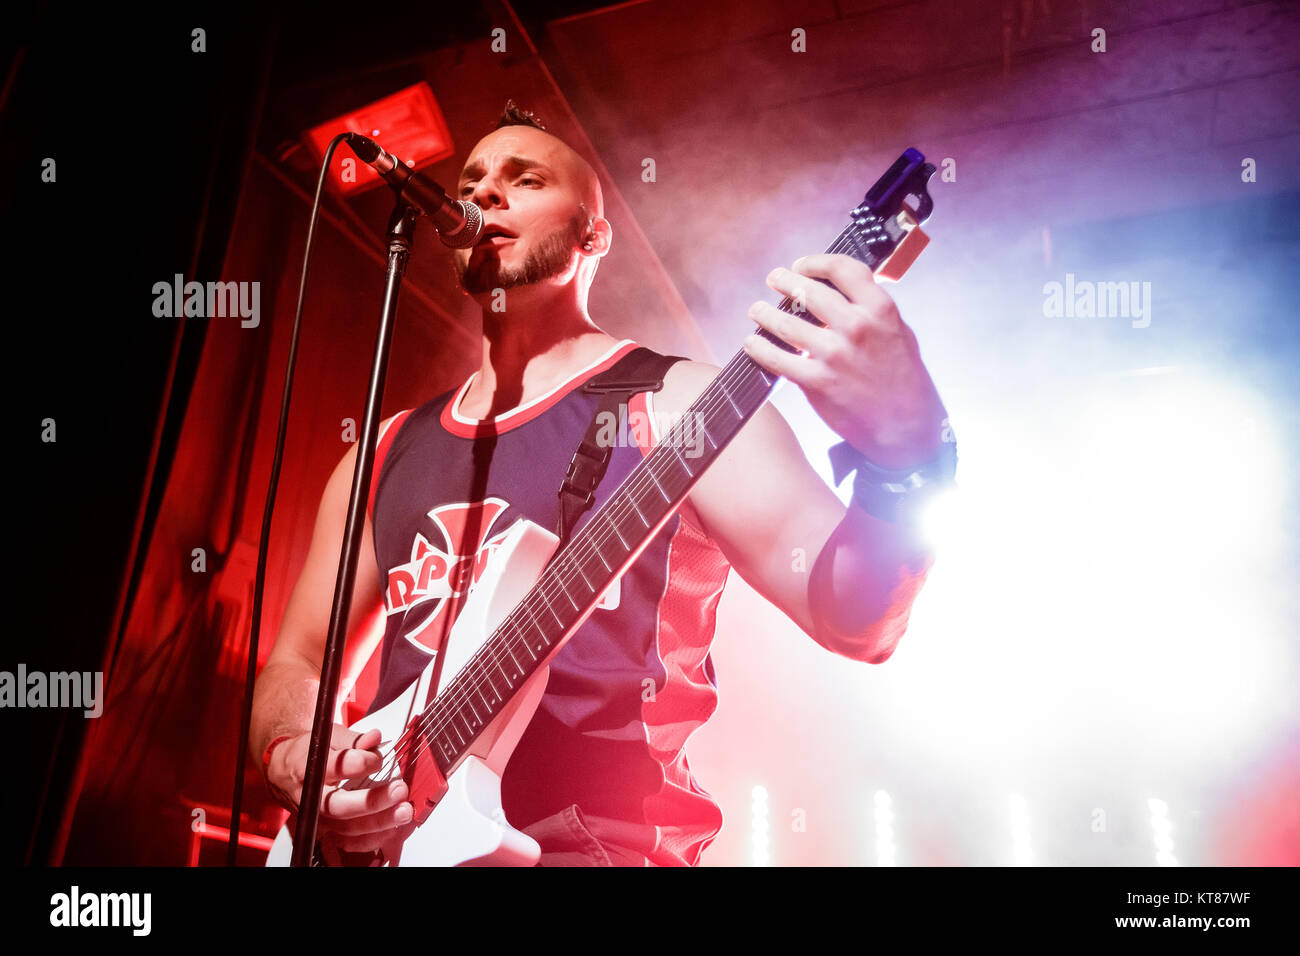 Denmark, Copenhagen - September 18, 2017. The Swedish metalcore band Dead  By April performs a live concert at VEGA in Copenhagen. Here vocalist and  guitarist Pontus Hjelm is seen live on stage. (